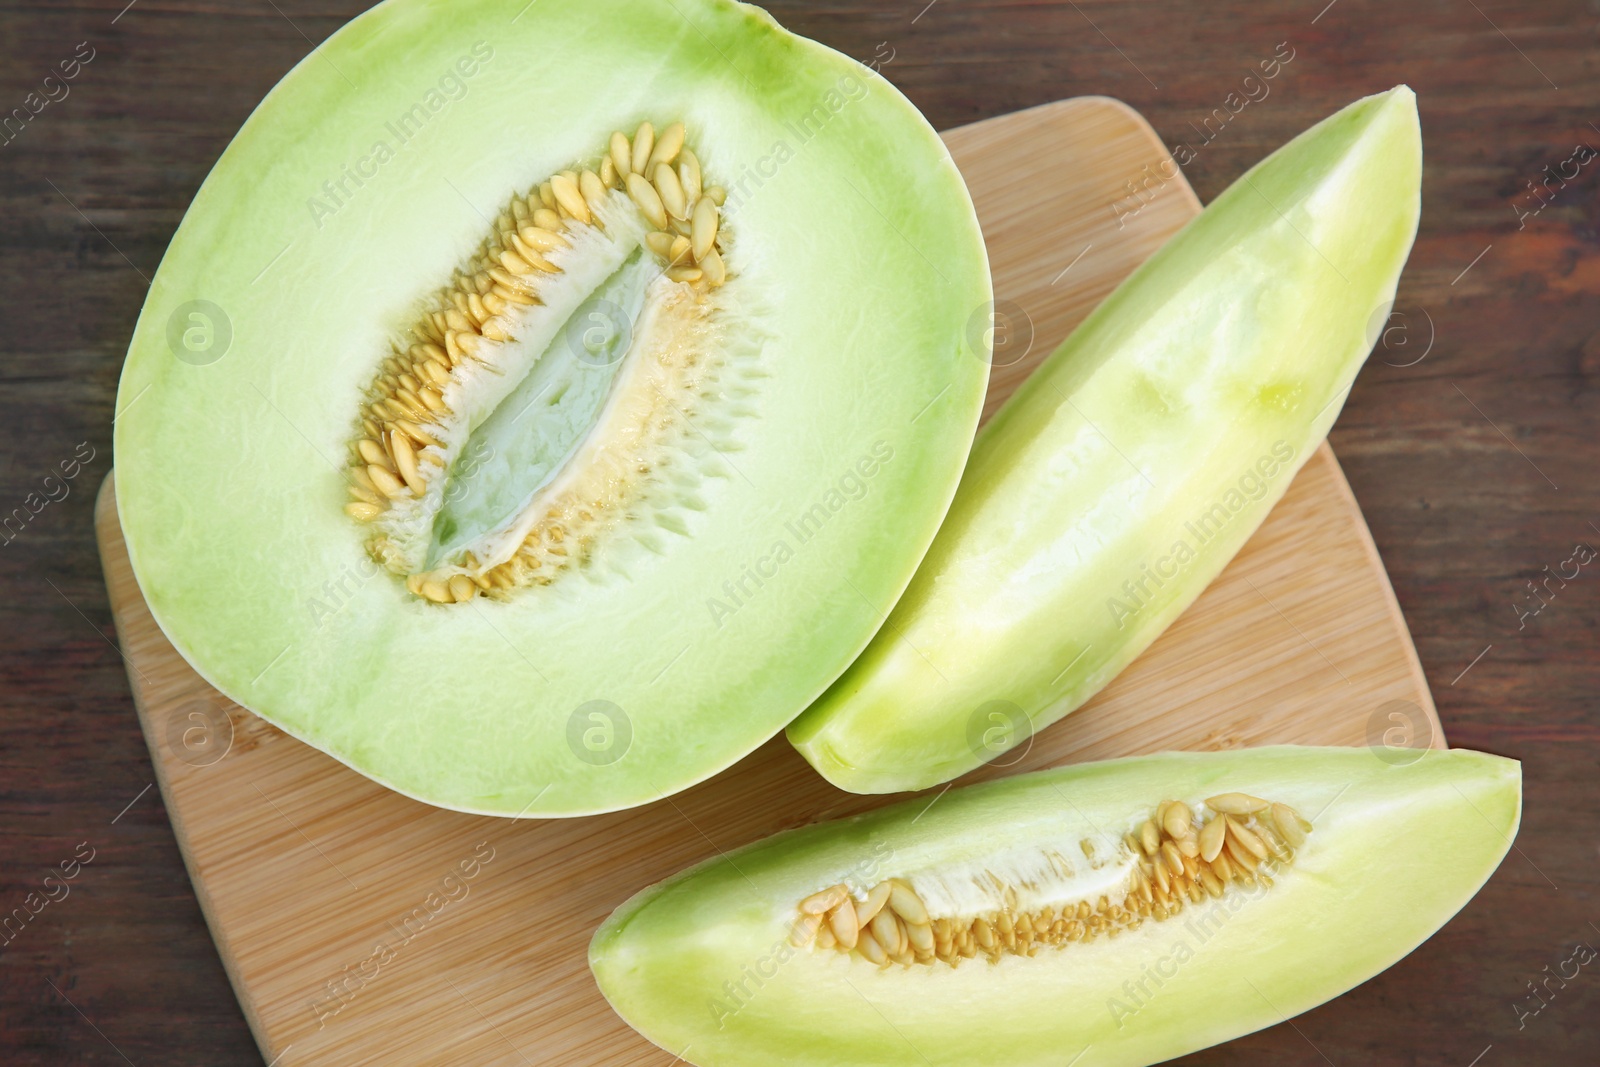 Photo of Cut tasty ripe melons on wooden table, above view